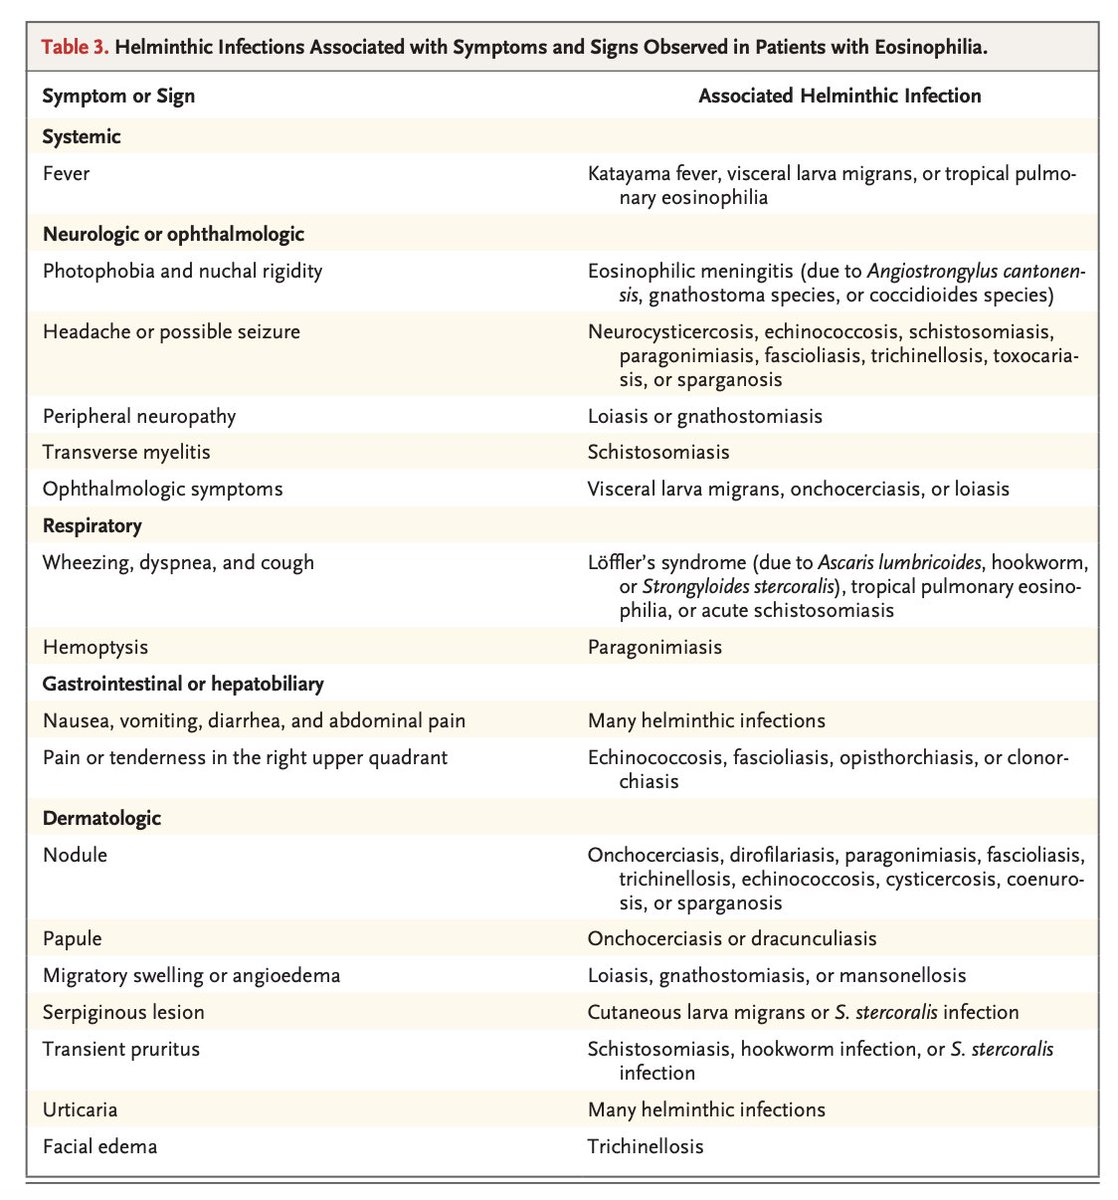 【Eosinophilia: Noninfectious and Infectious Causes】@NEJM June 7, 2023

👉Very useful discussion to learn about ID and non-ID DDx of eosinophilia!

nejm.org/doi/full/10.10…

@UT_Infectious #IDFellow #IMResident #IDMedEd @1min_idconsult @BCM_TropMed